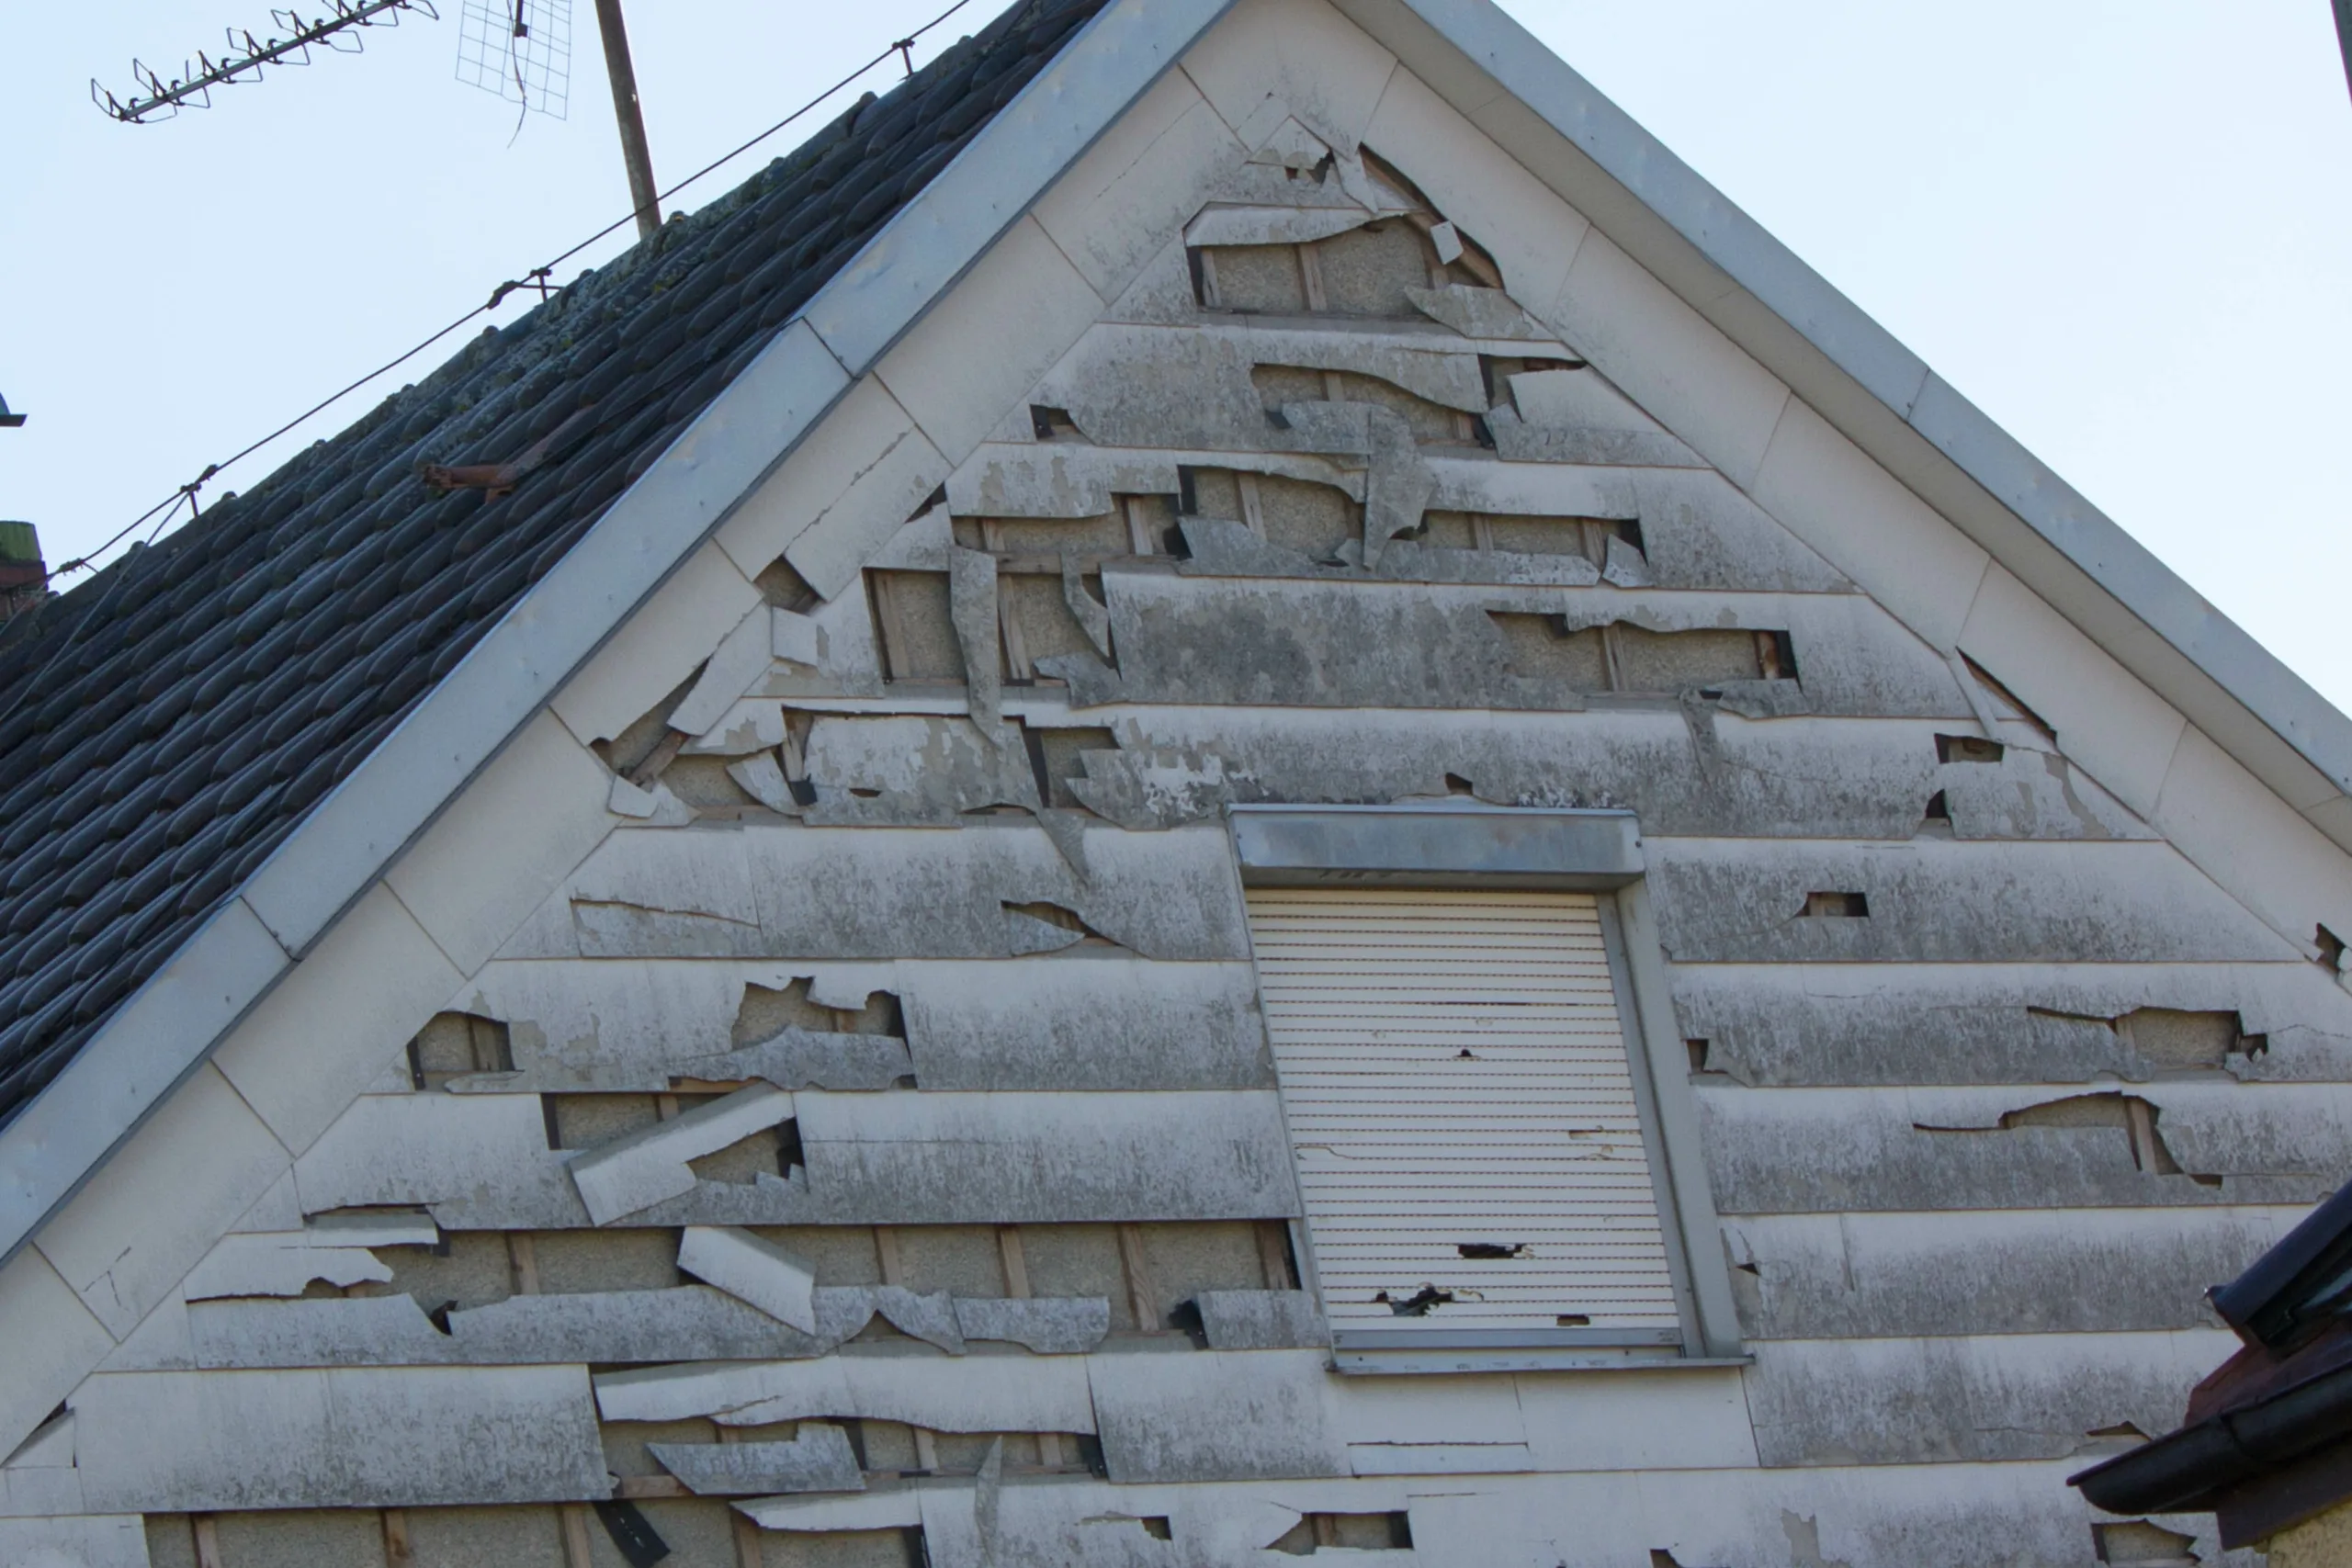 Home with Severe hail damage to siding